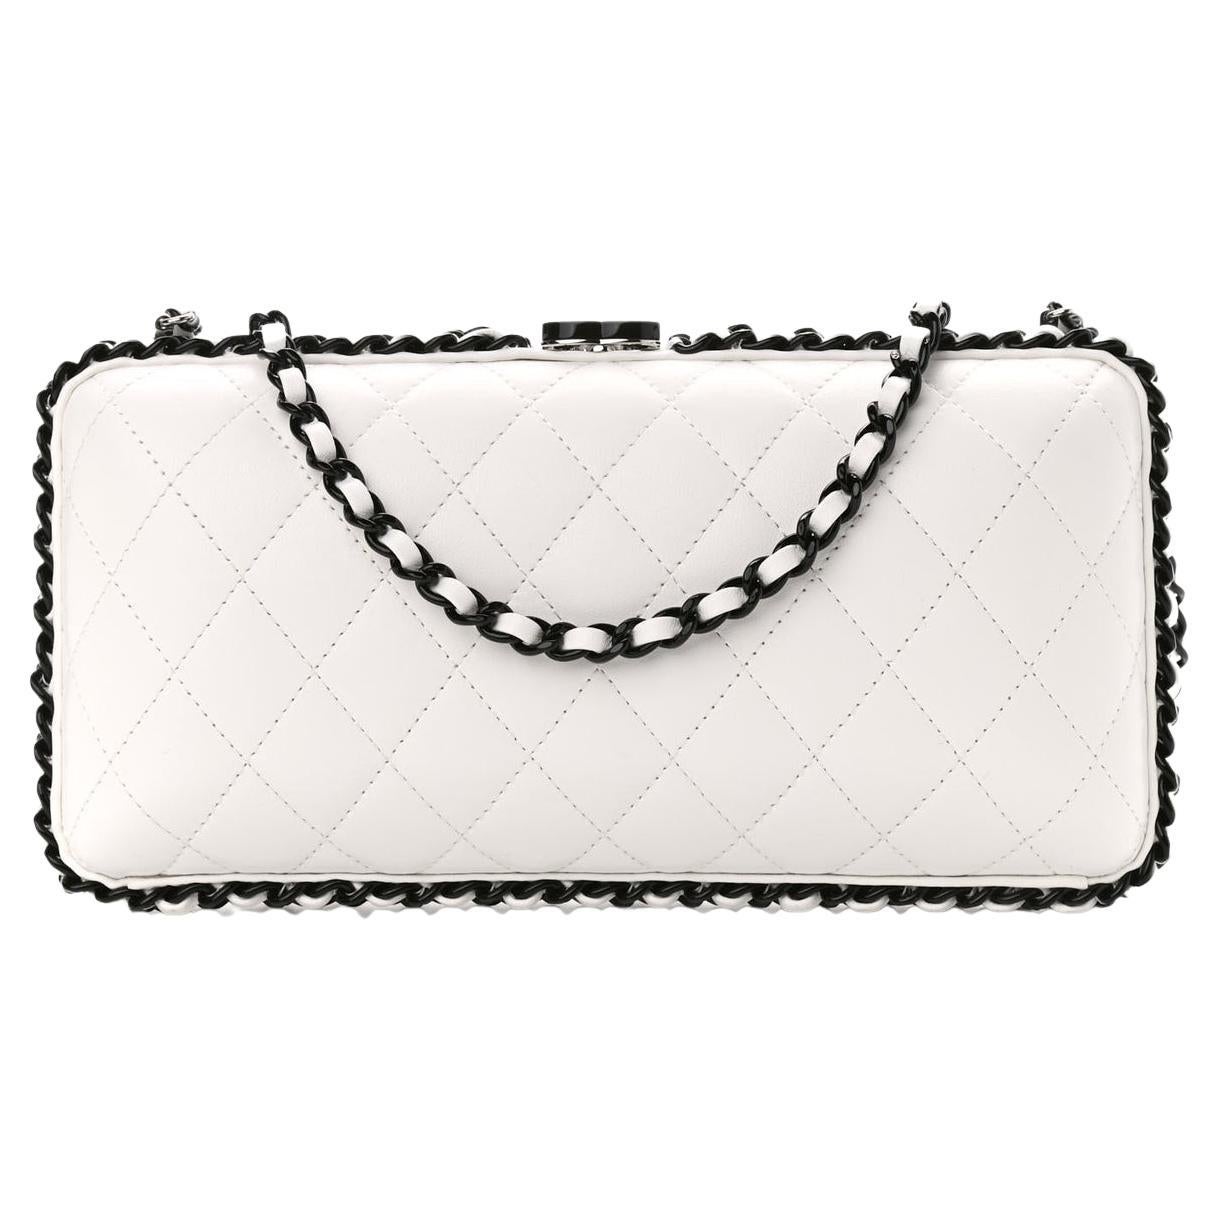 CHANEL White Lambskin Quilted Leather Black Wrap Around Shoulder Flap Clutch Bag